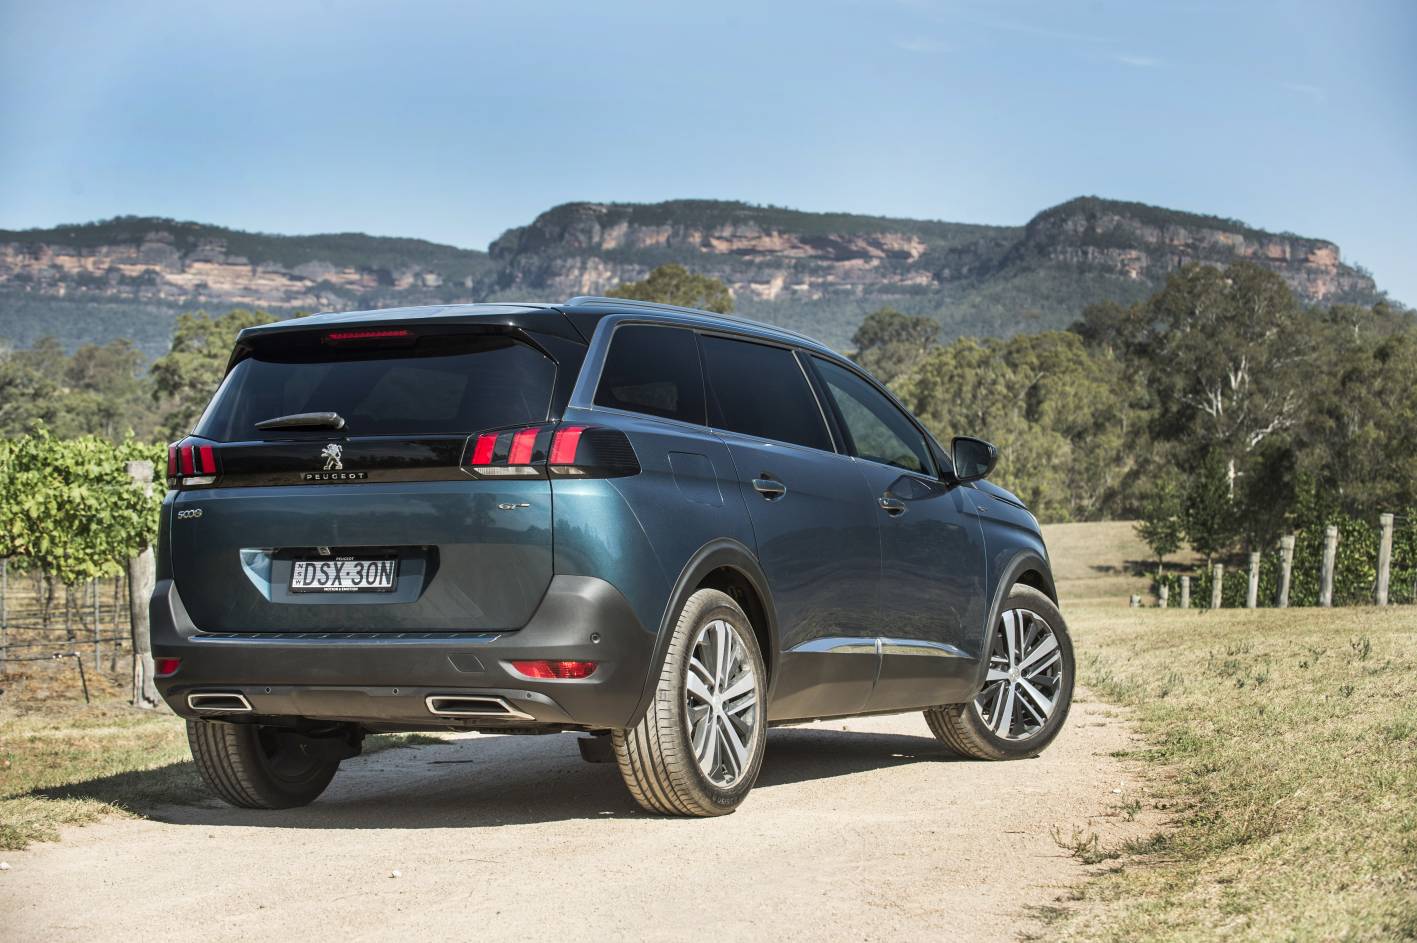 Peugeot 5008 7-seater SUV promises benchmark space and versatility - ForceGT.com